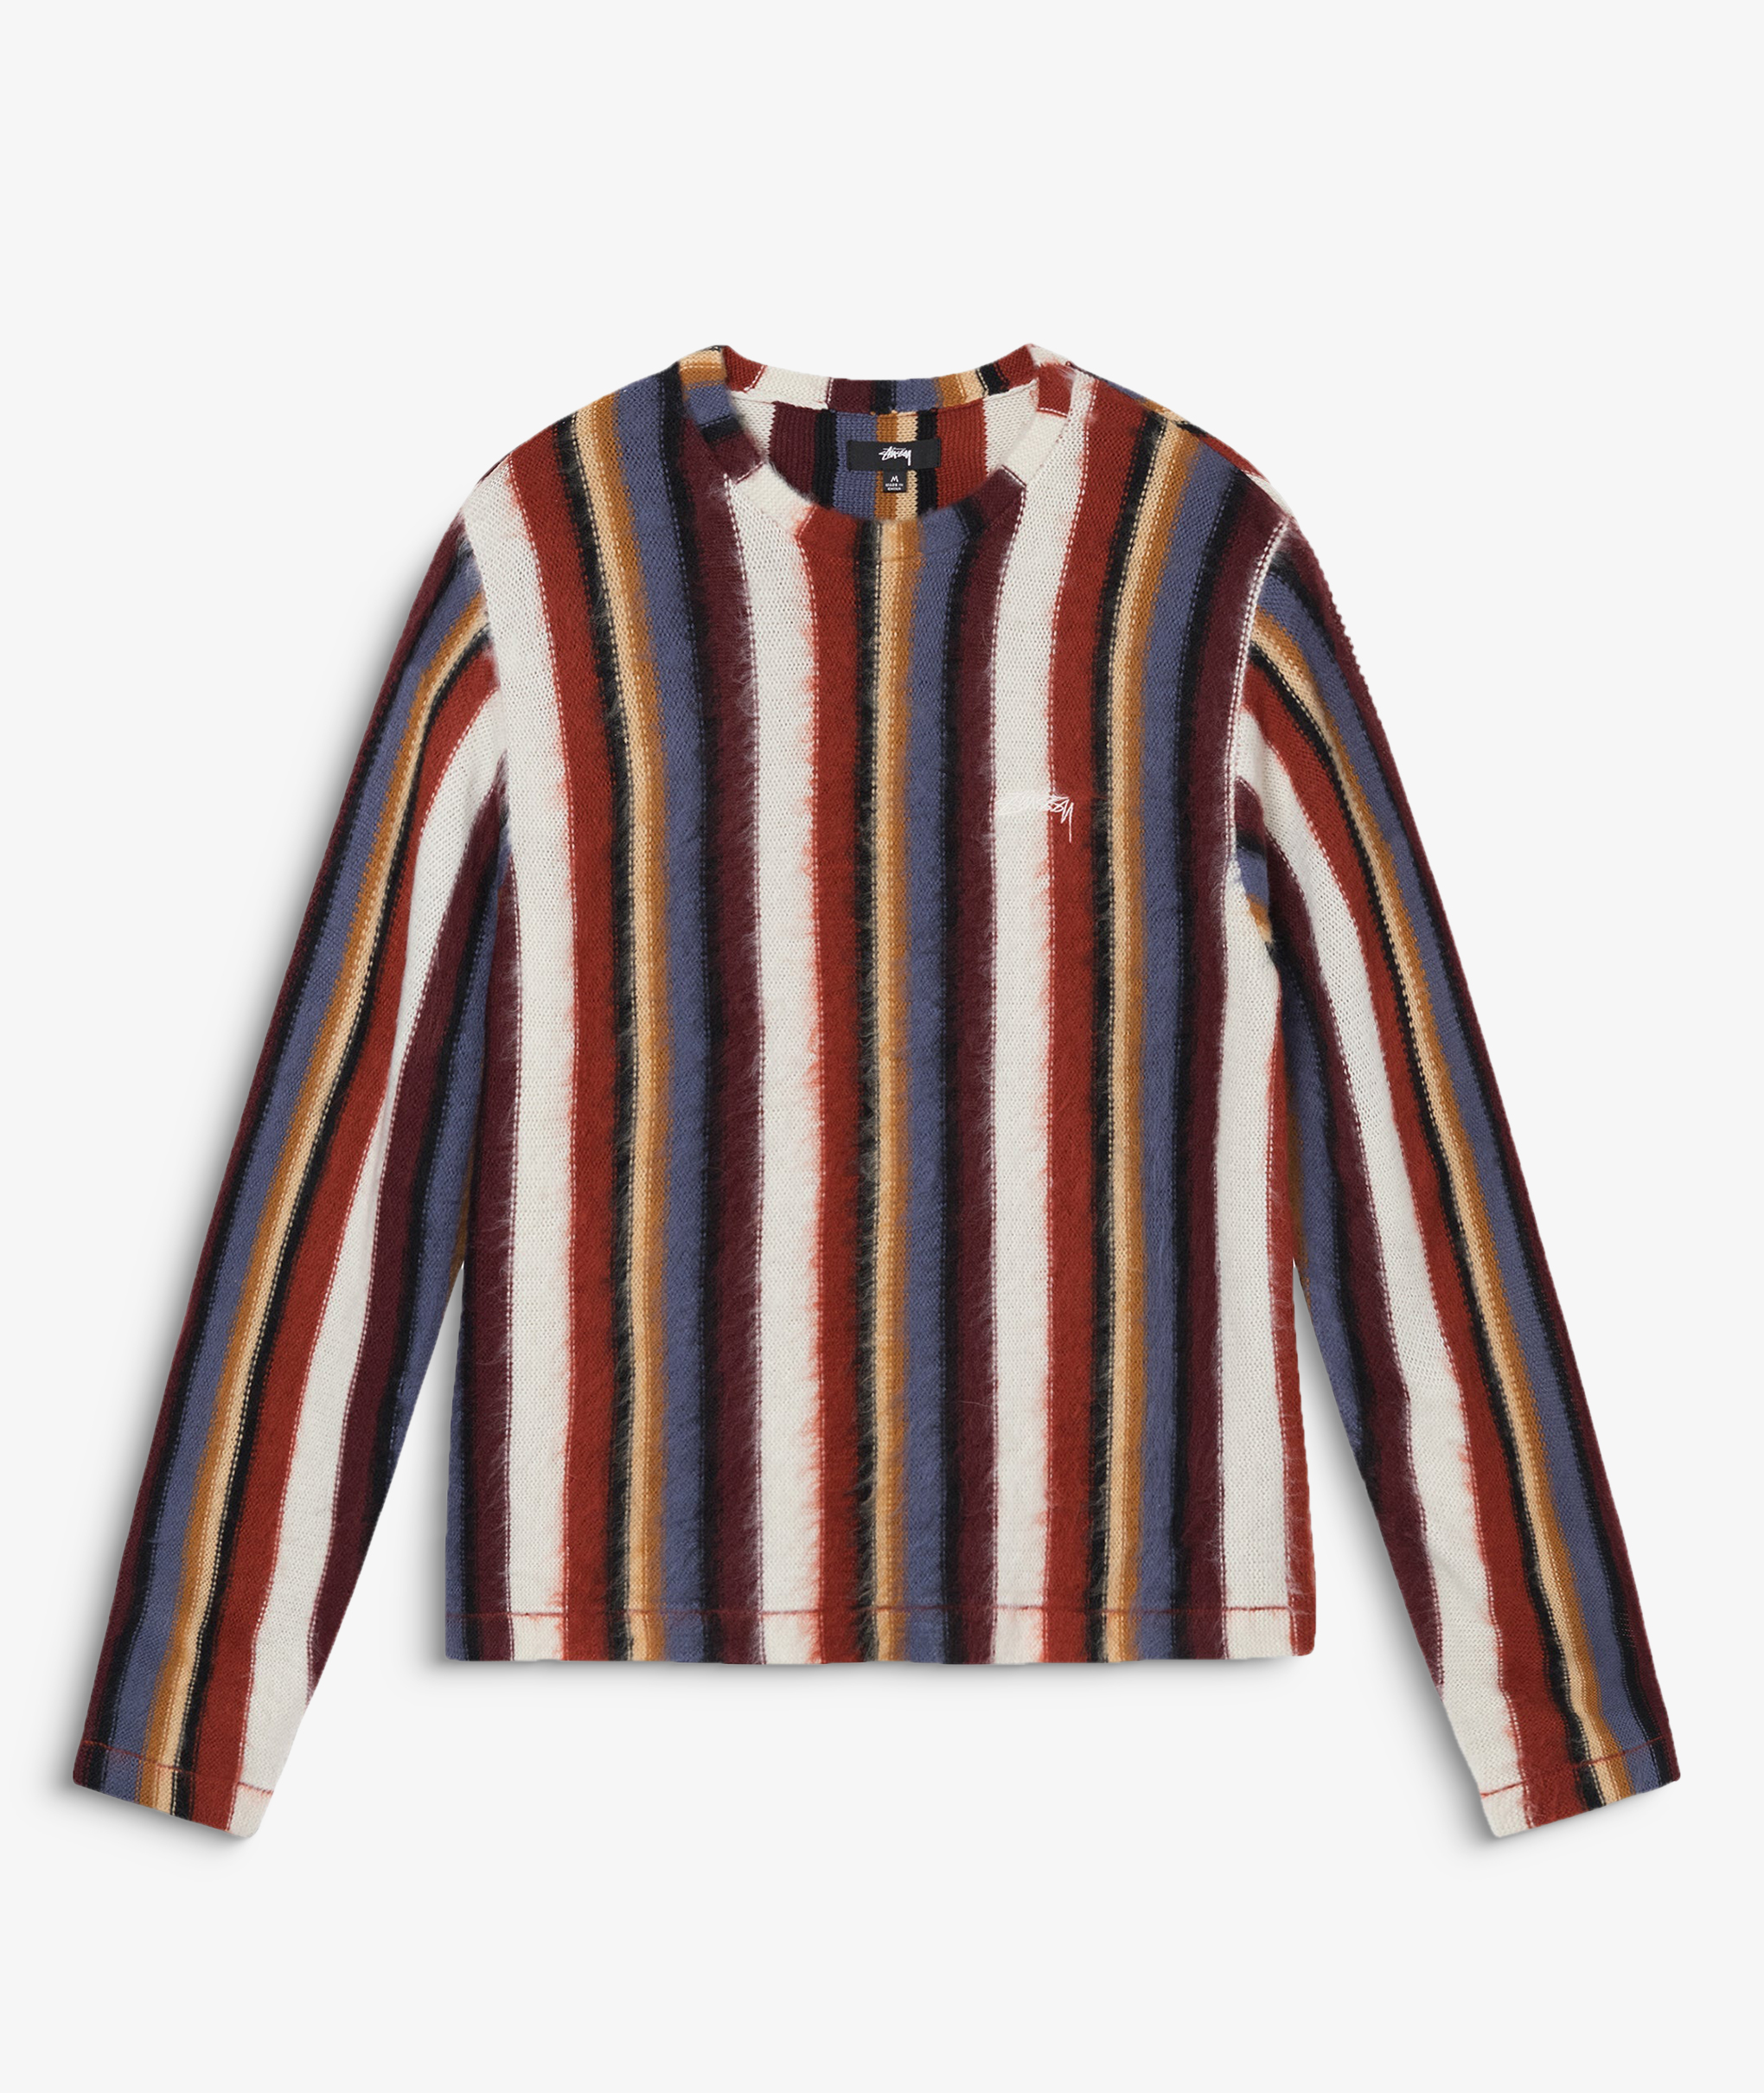 Norse Store | Shipping Worldwide - Stussy Verical Stripe sweater